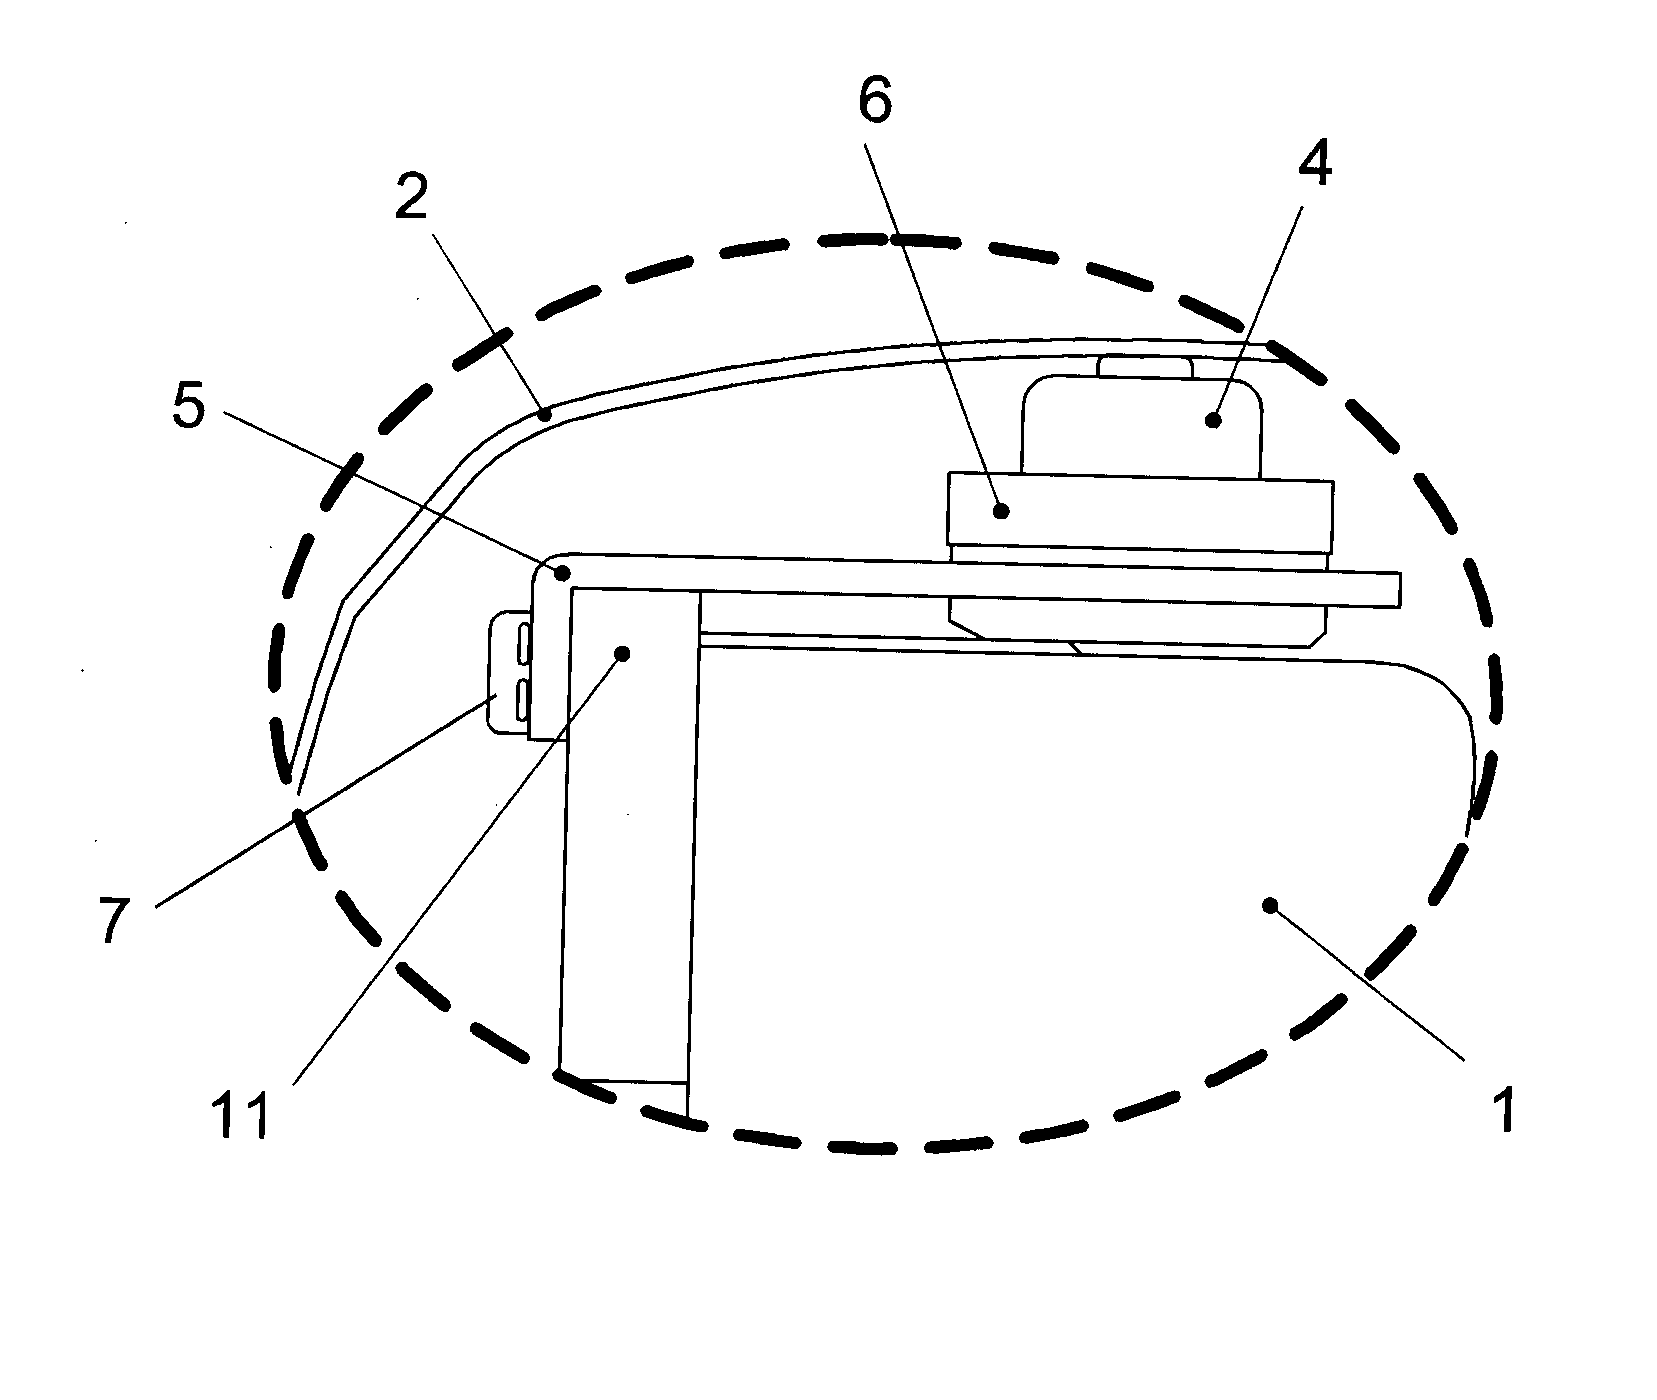 Hermetic Reciprocating Compressor for Mobile Application Provided With a Movement Limiting Assembly